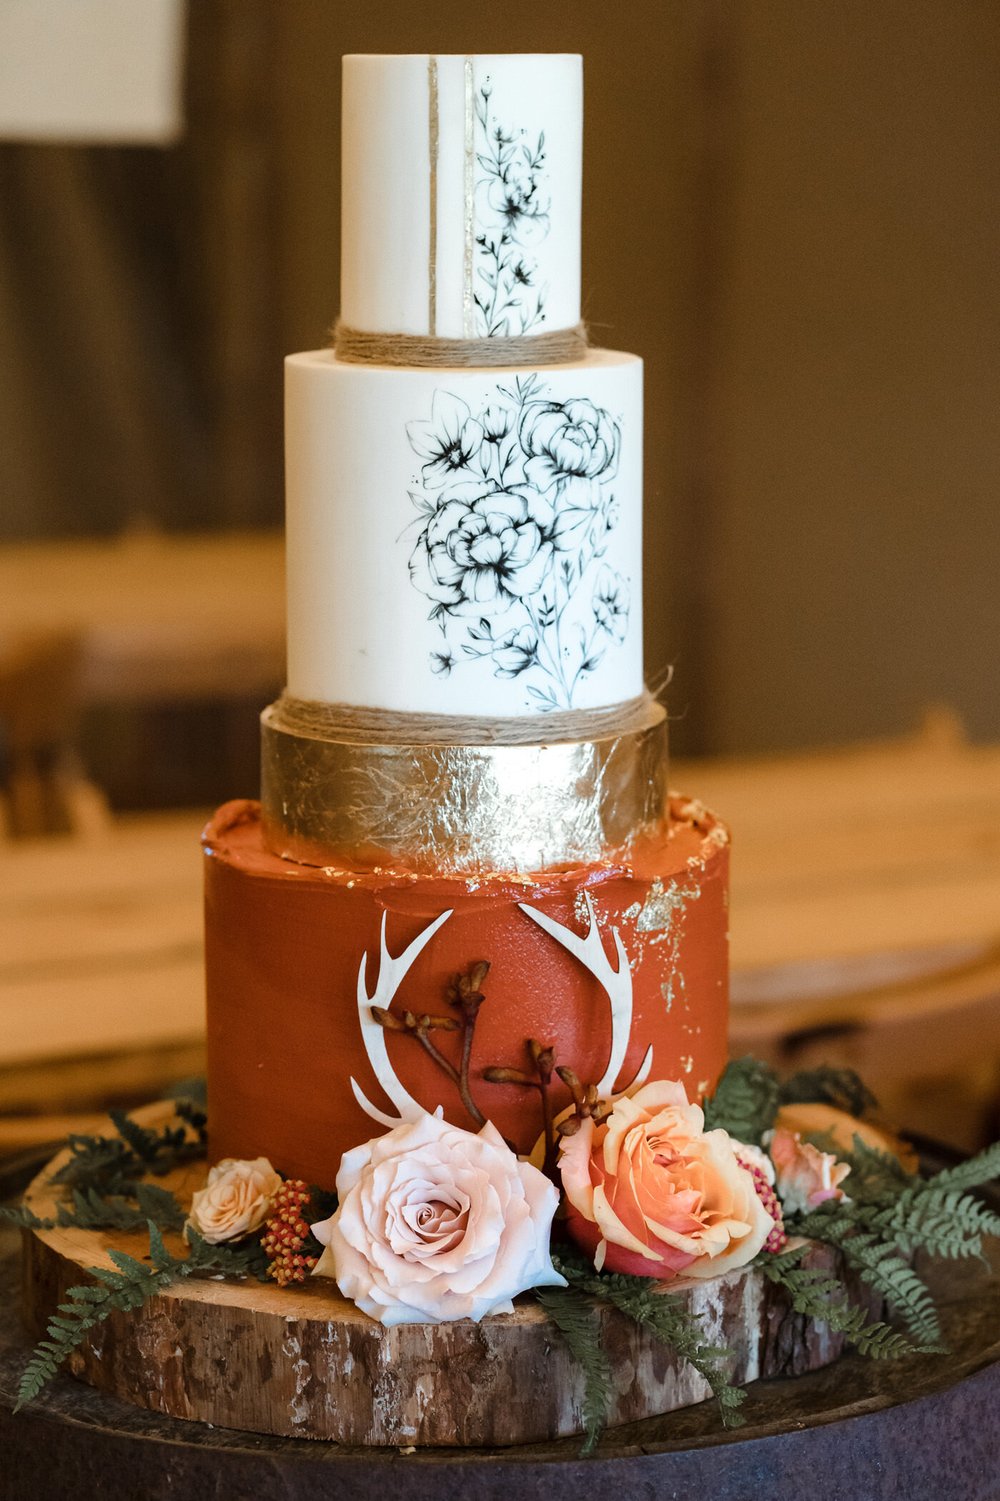 wild wedding cake with stag detailing and gold leaf